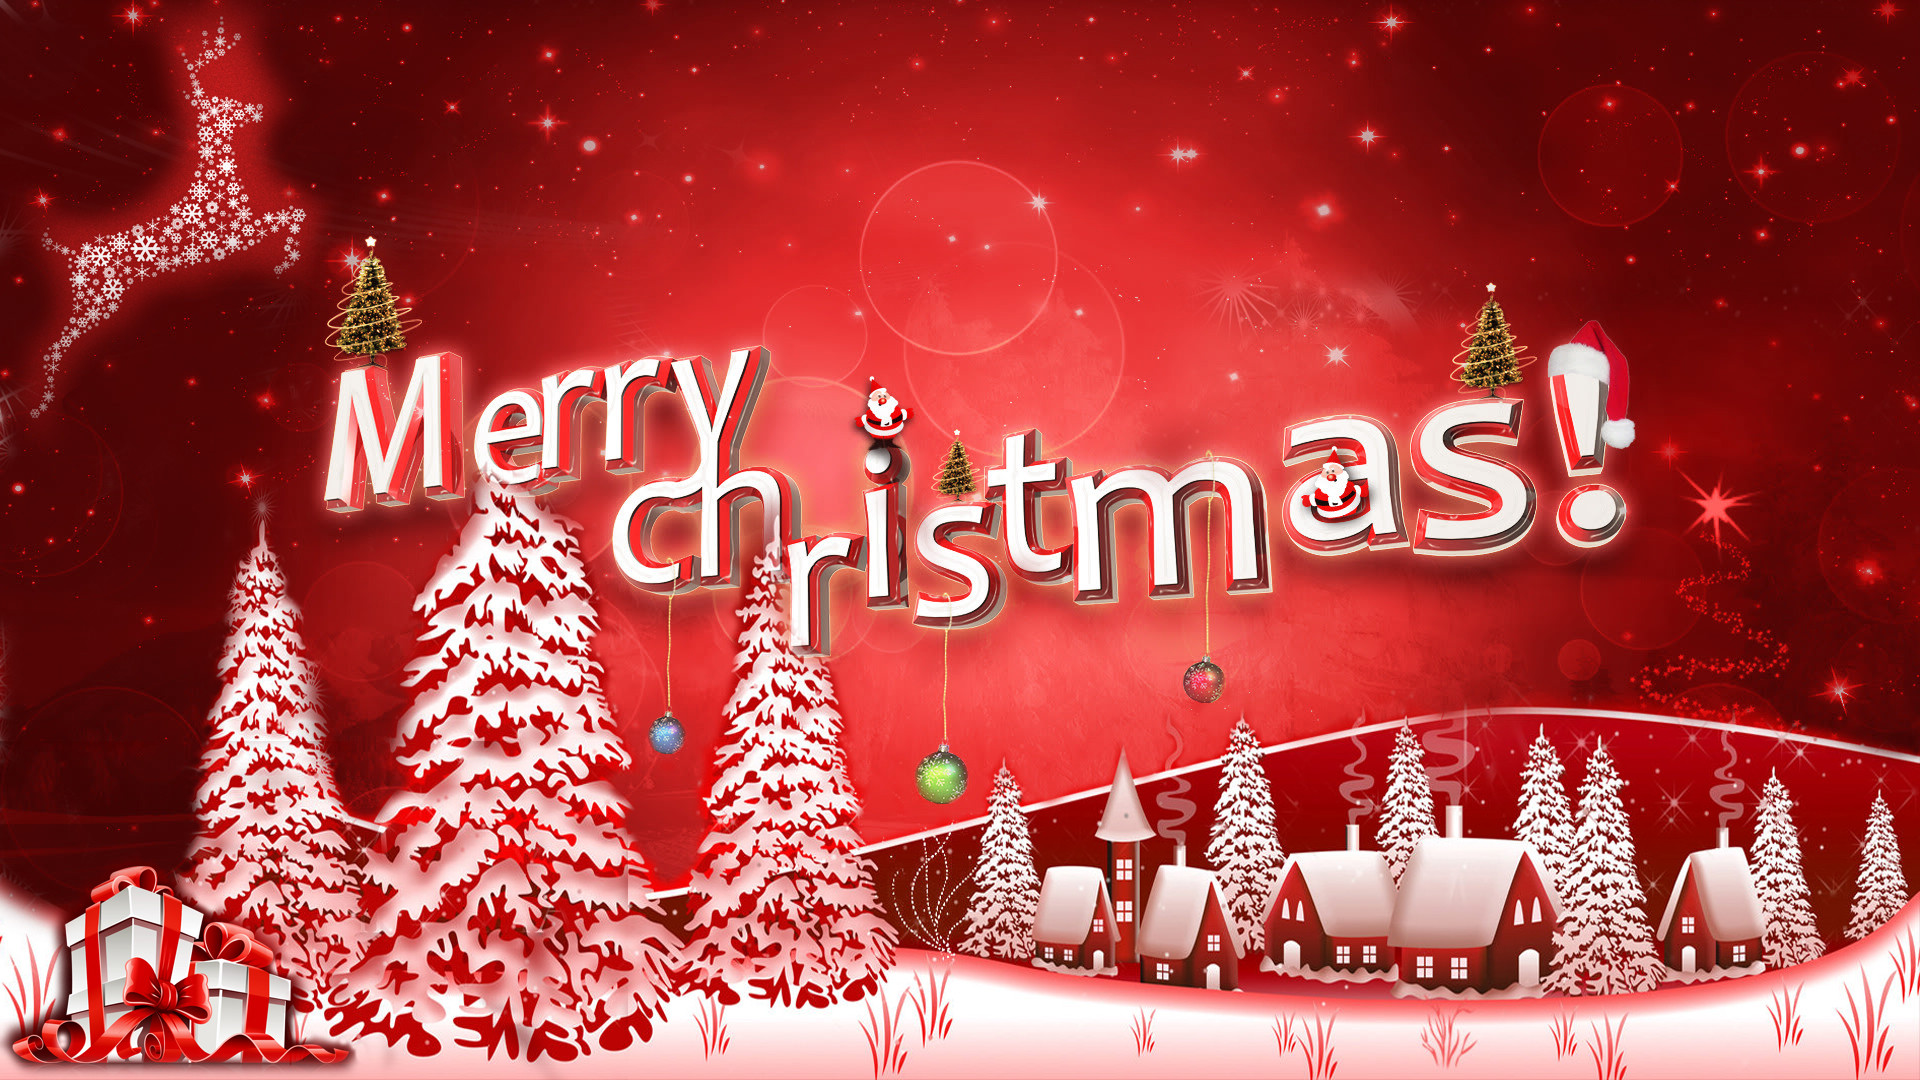 16 HD Christmas Desktop Wallpapers For Free Download